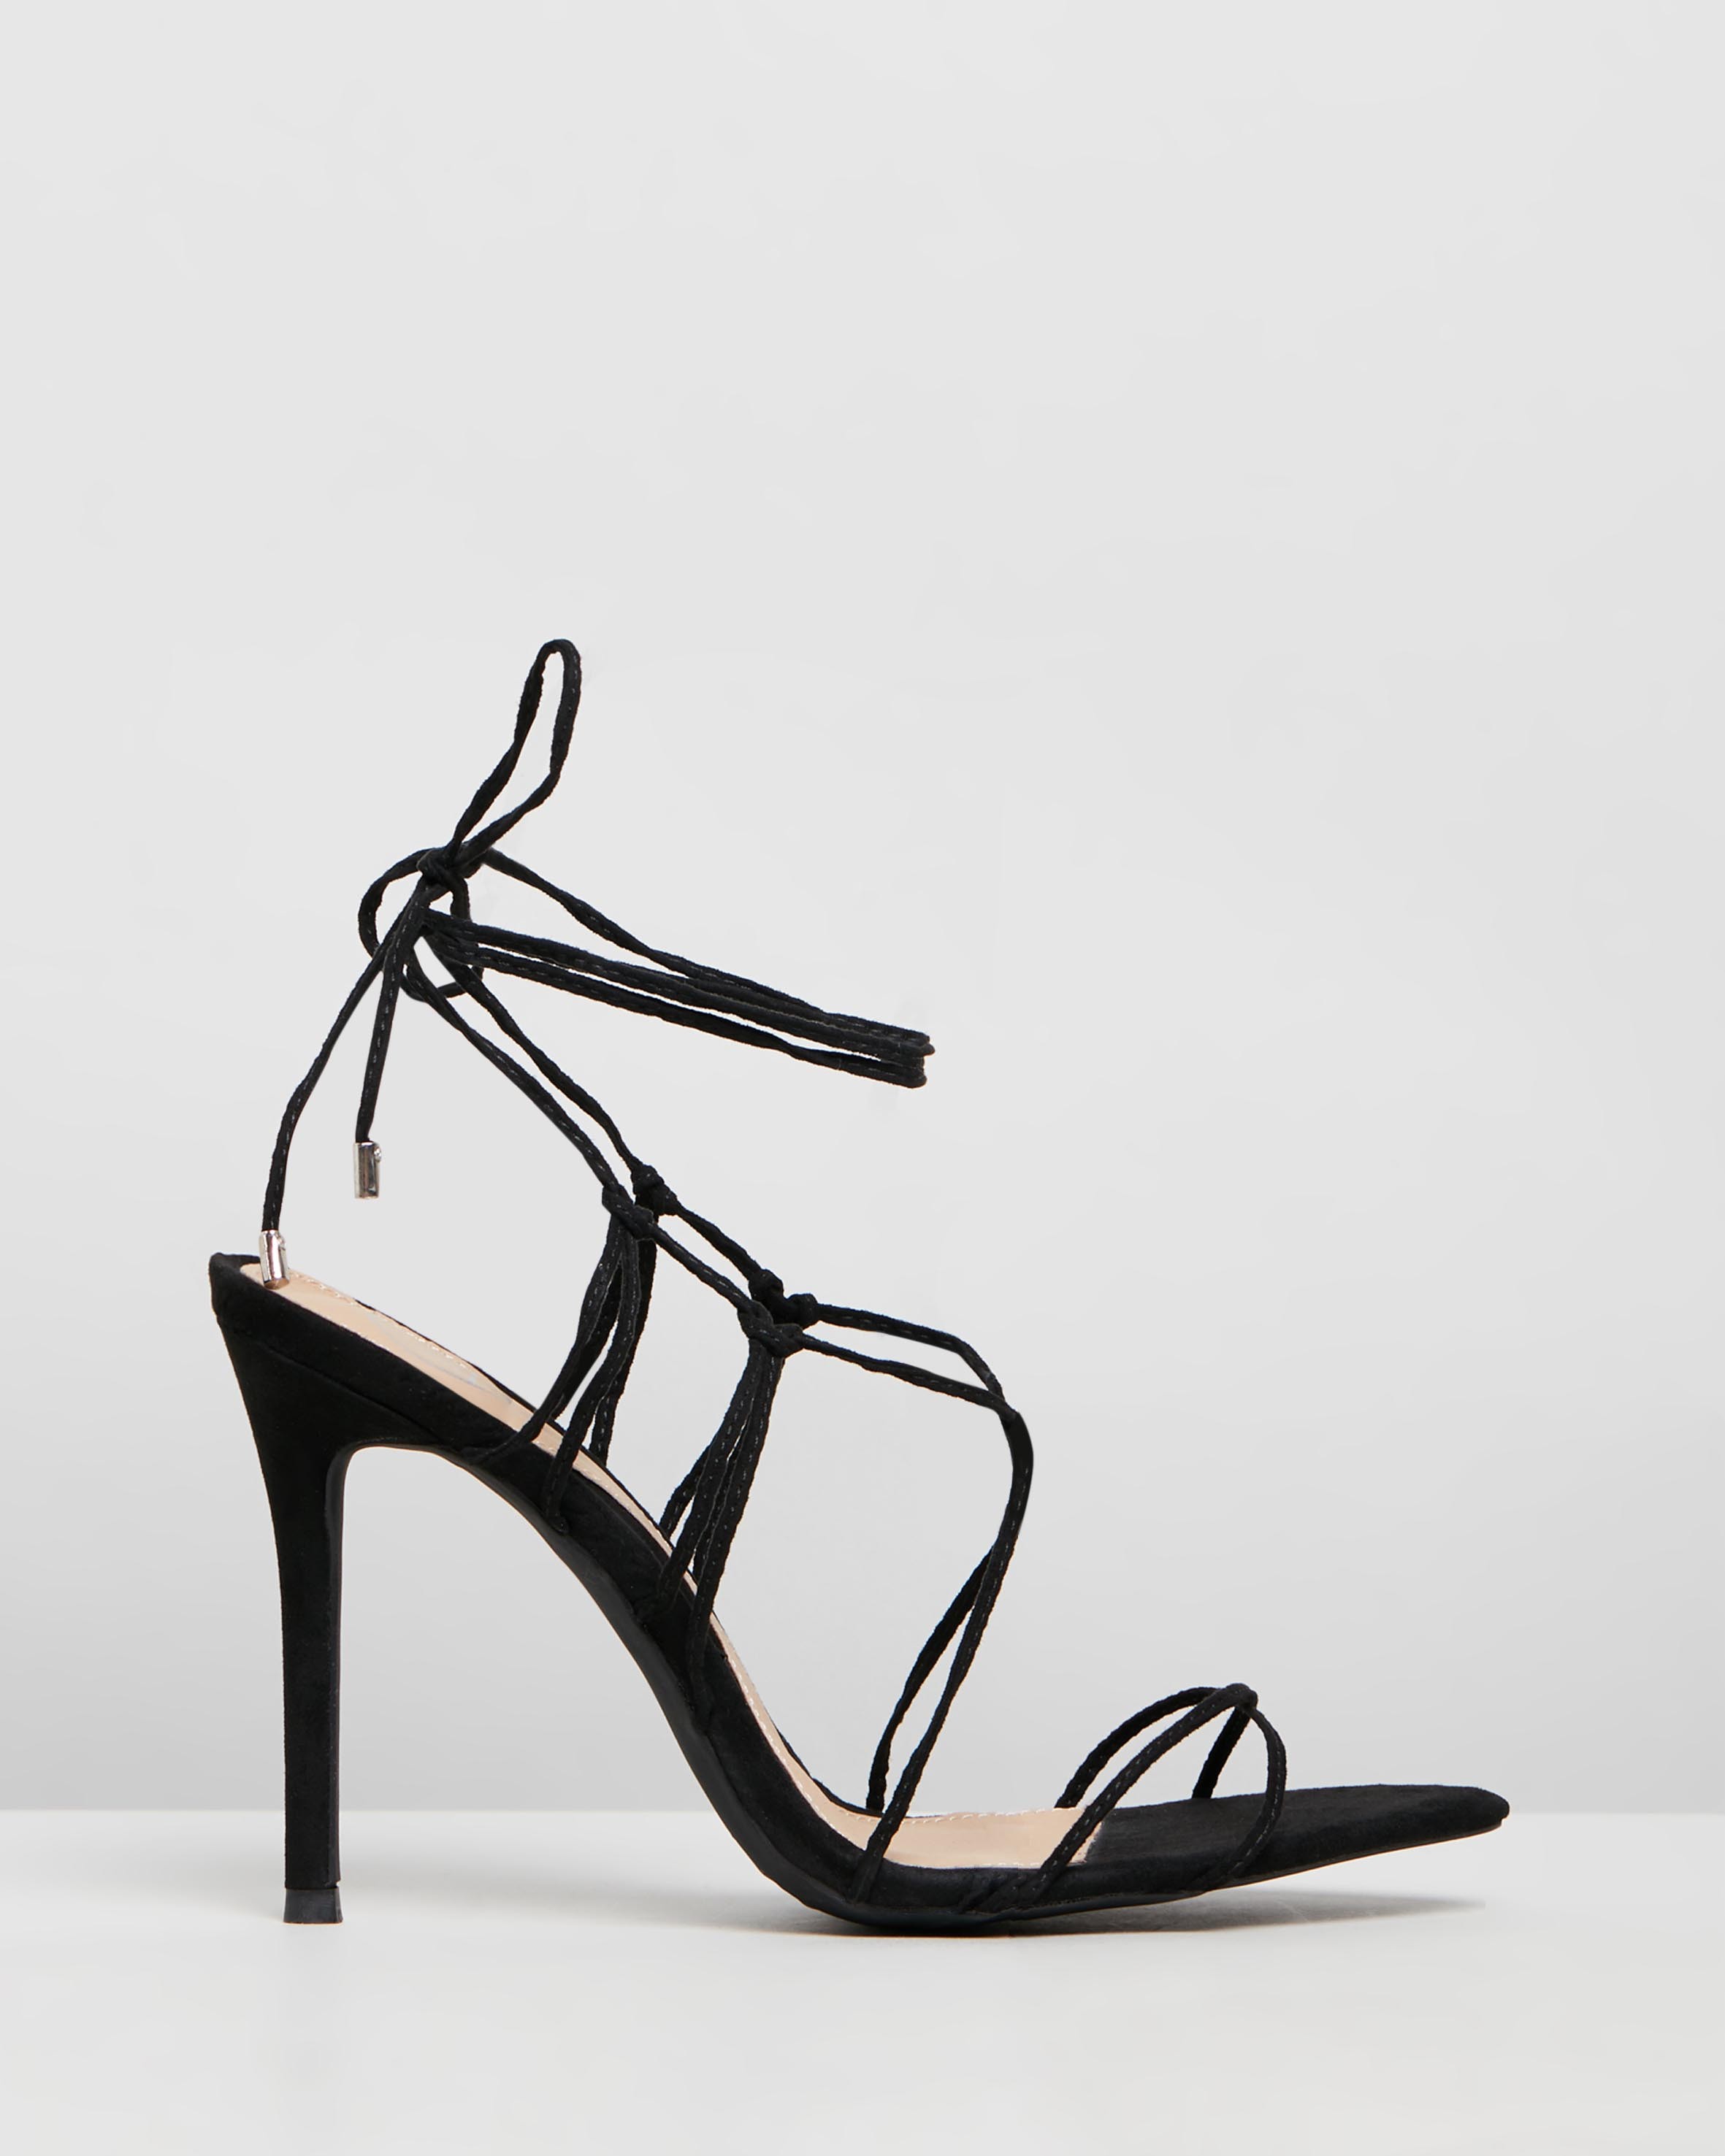 Lace-Up Pointed Toe Heels Black by Missguided | ShoeSales